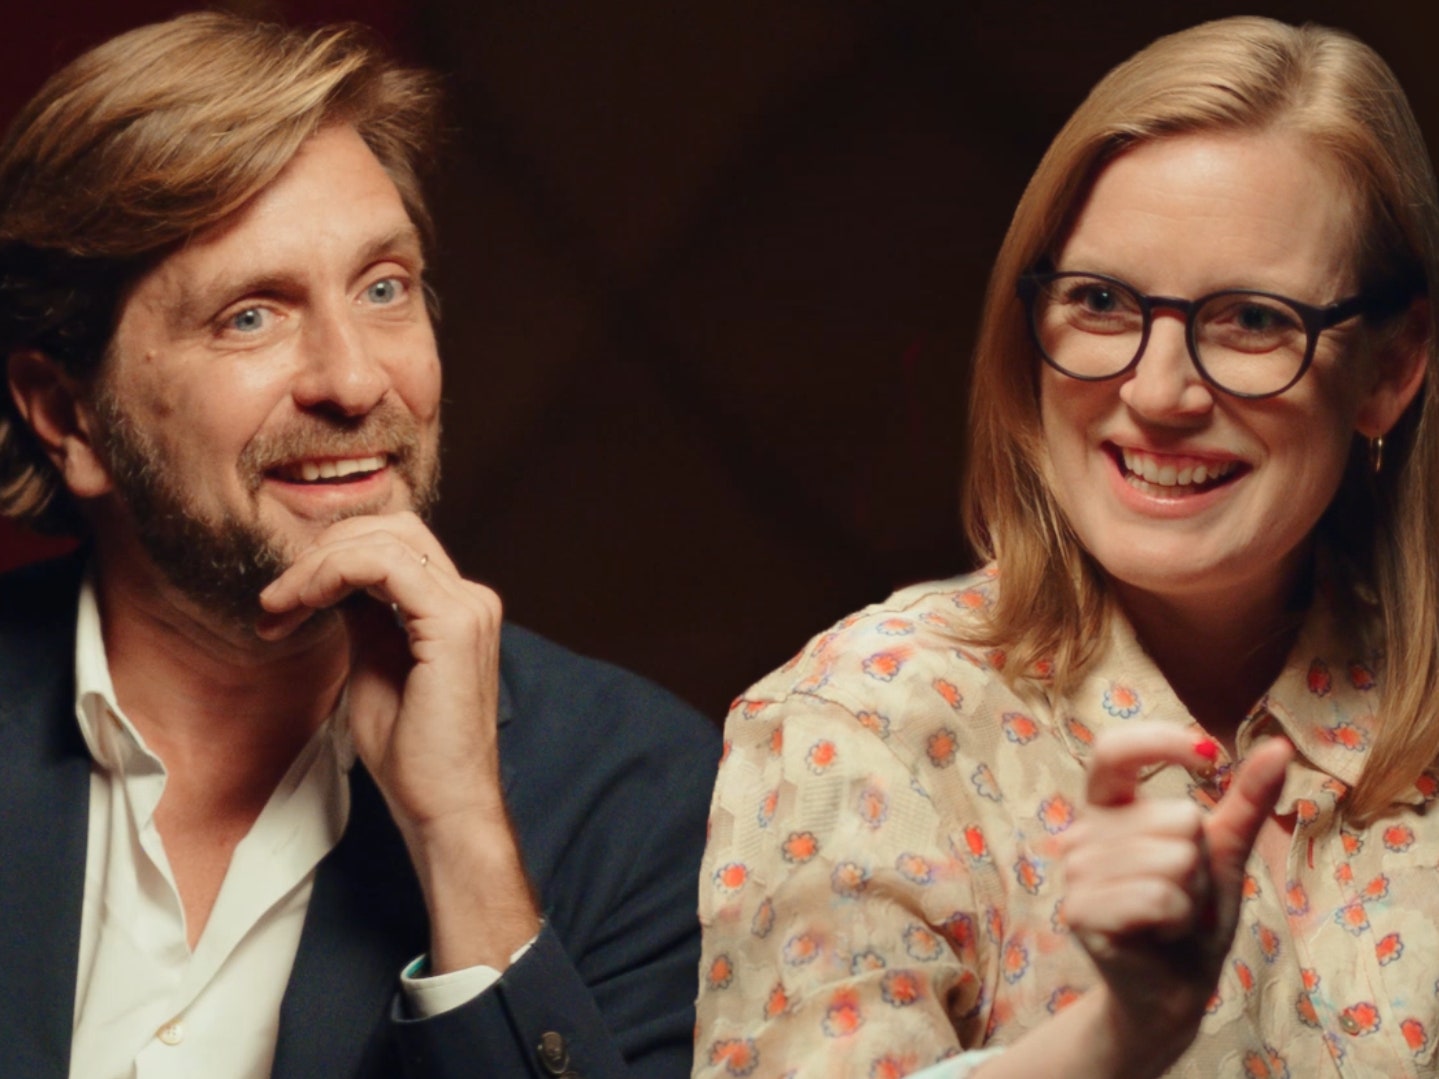 Sarah Polley and Ruben Östlund on Juggling Acting Ensembles and Pushing Their Audiences